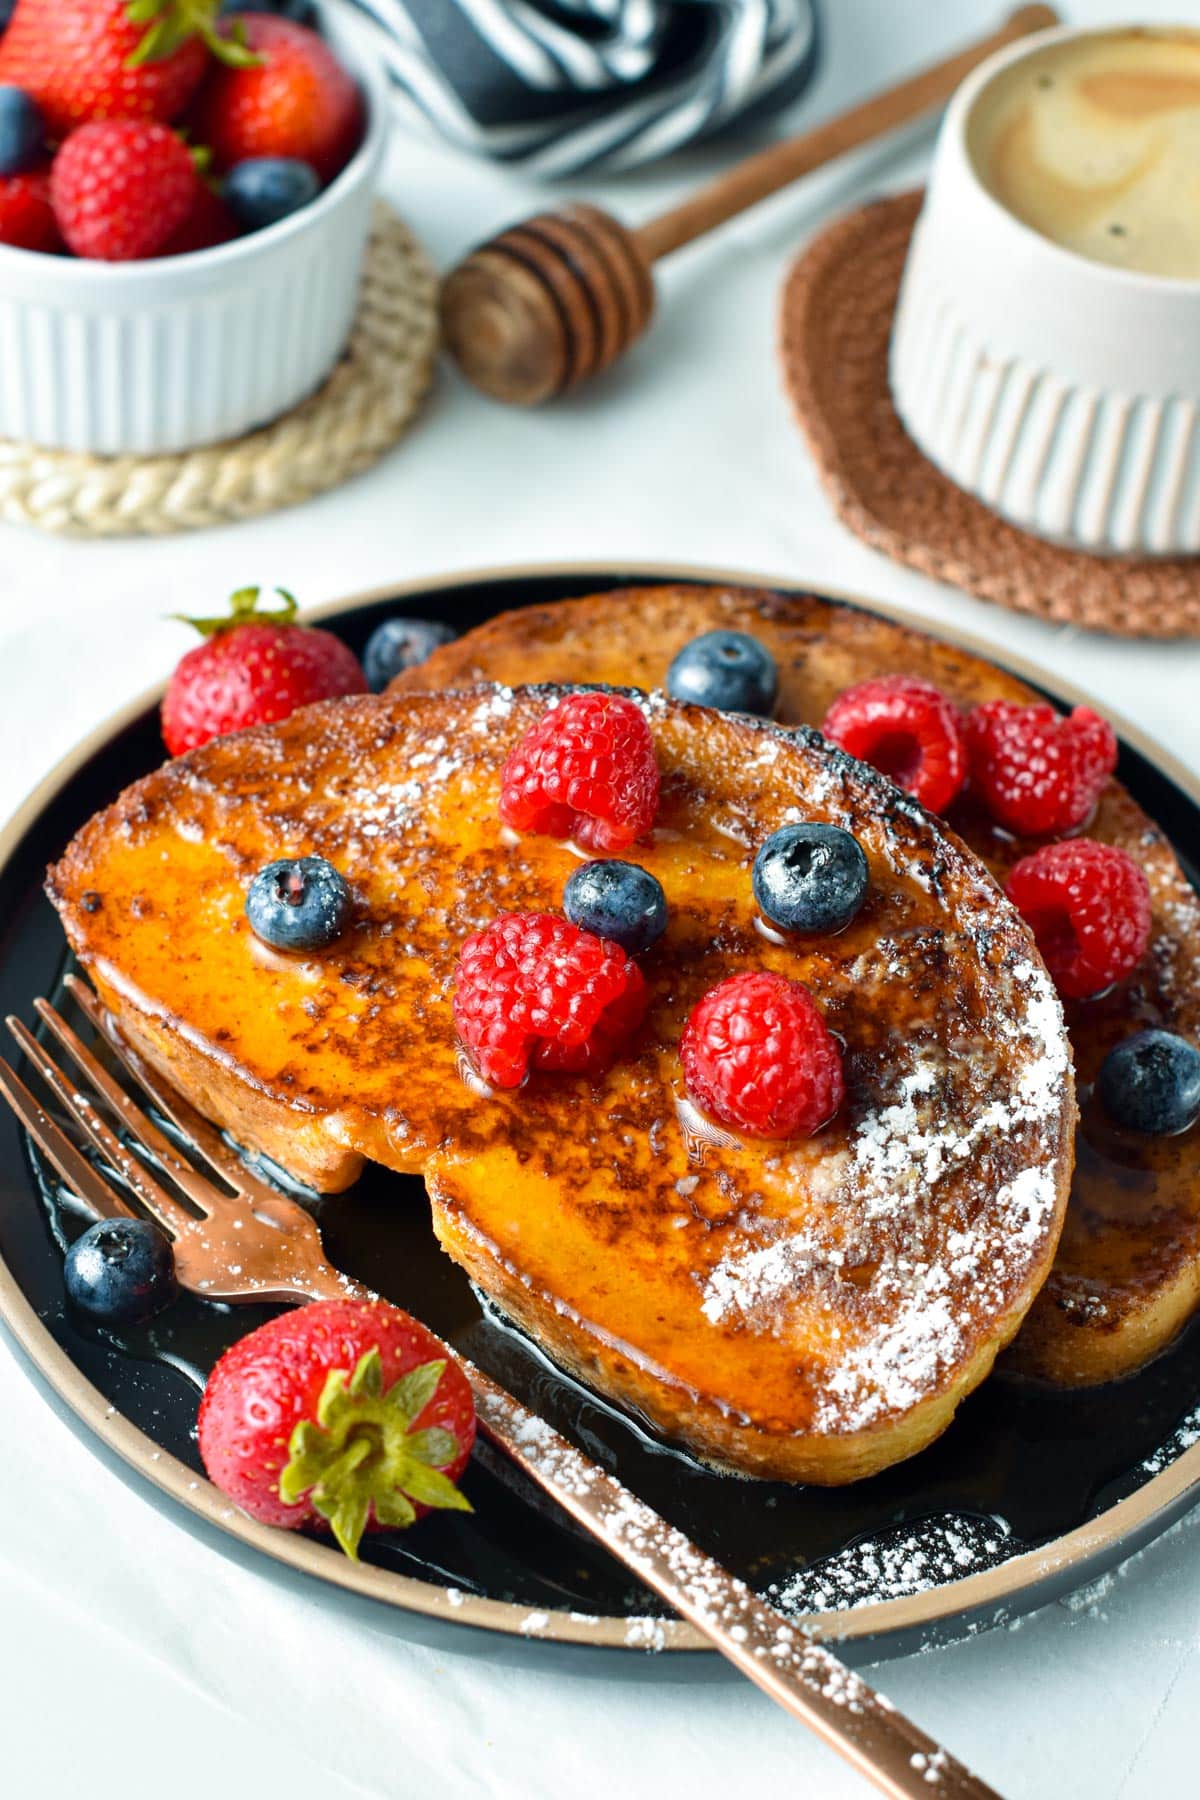 These Sourdough French Toast are the most delicious family breakfast recipe with thick slices of sourdough bread custardy on the inside and crispy on the edges.